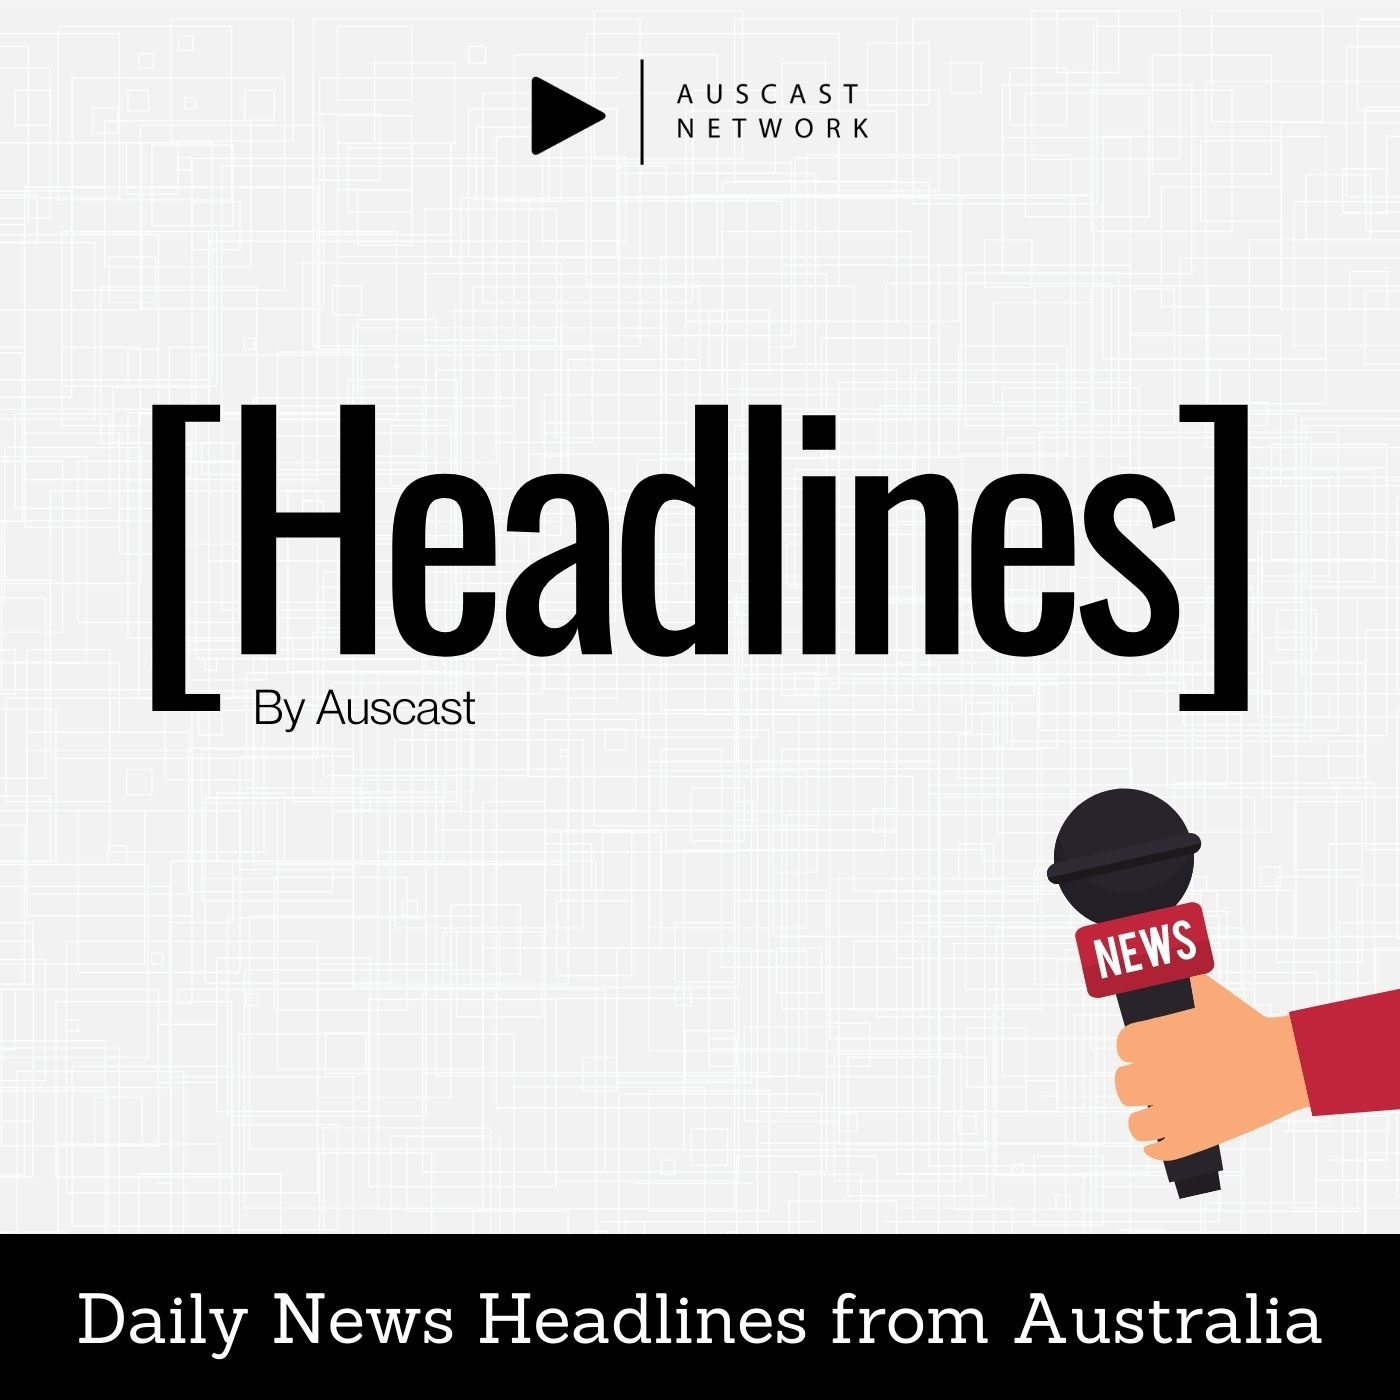 AUSTRALIA is pushing ahead Astra Zeneca vaccine, Queenslanders are waiting, Blue Mountains Rescue and more - Headlines by Auscast - Tuesday March 16, 2021